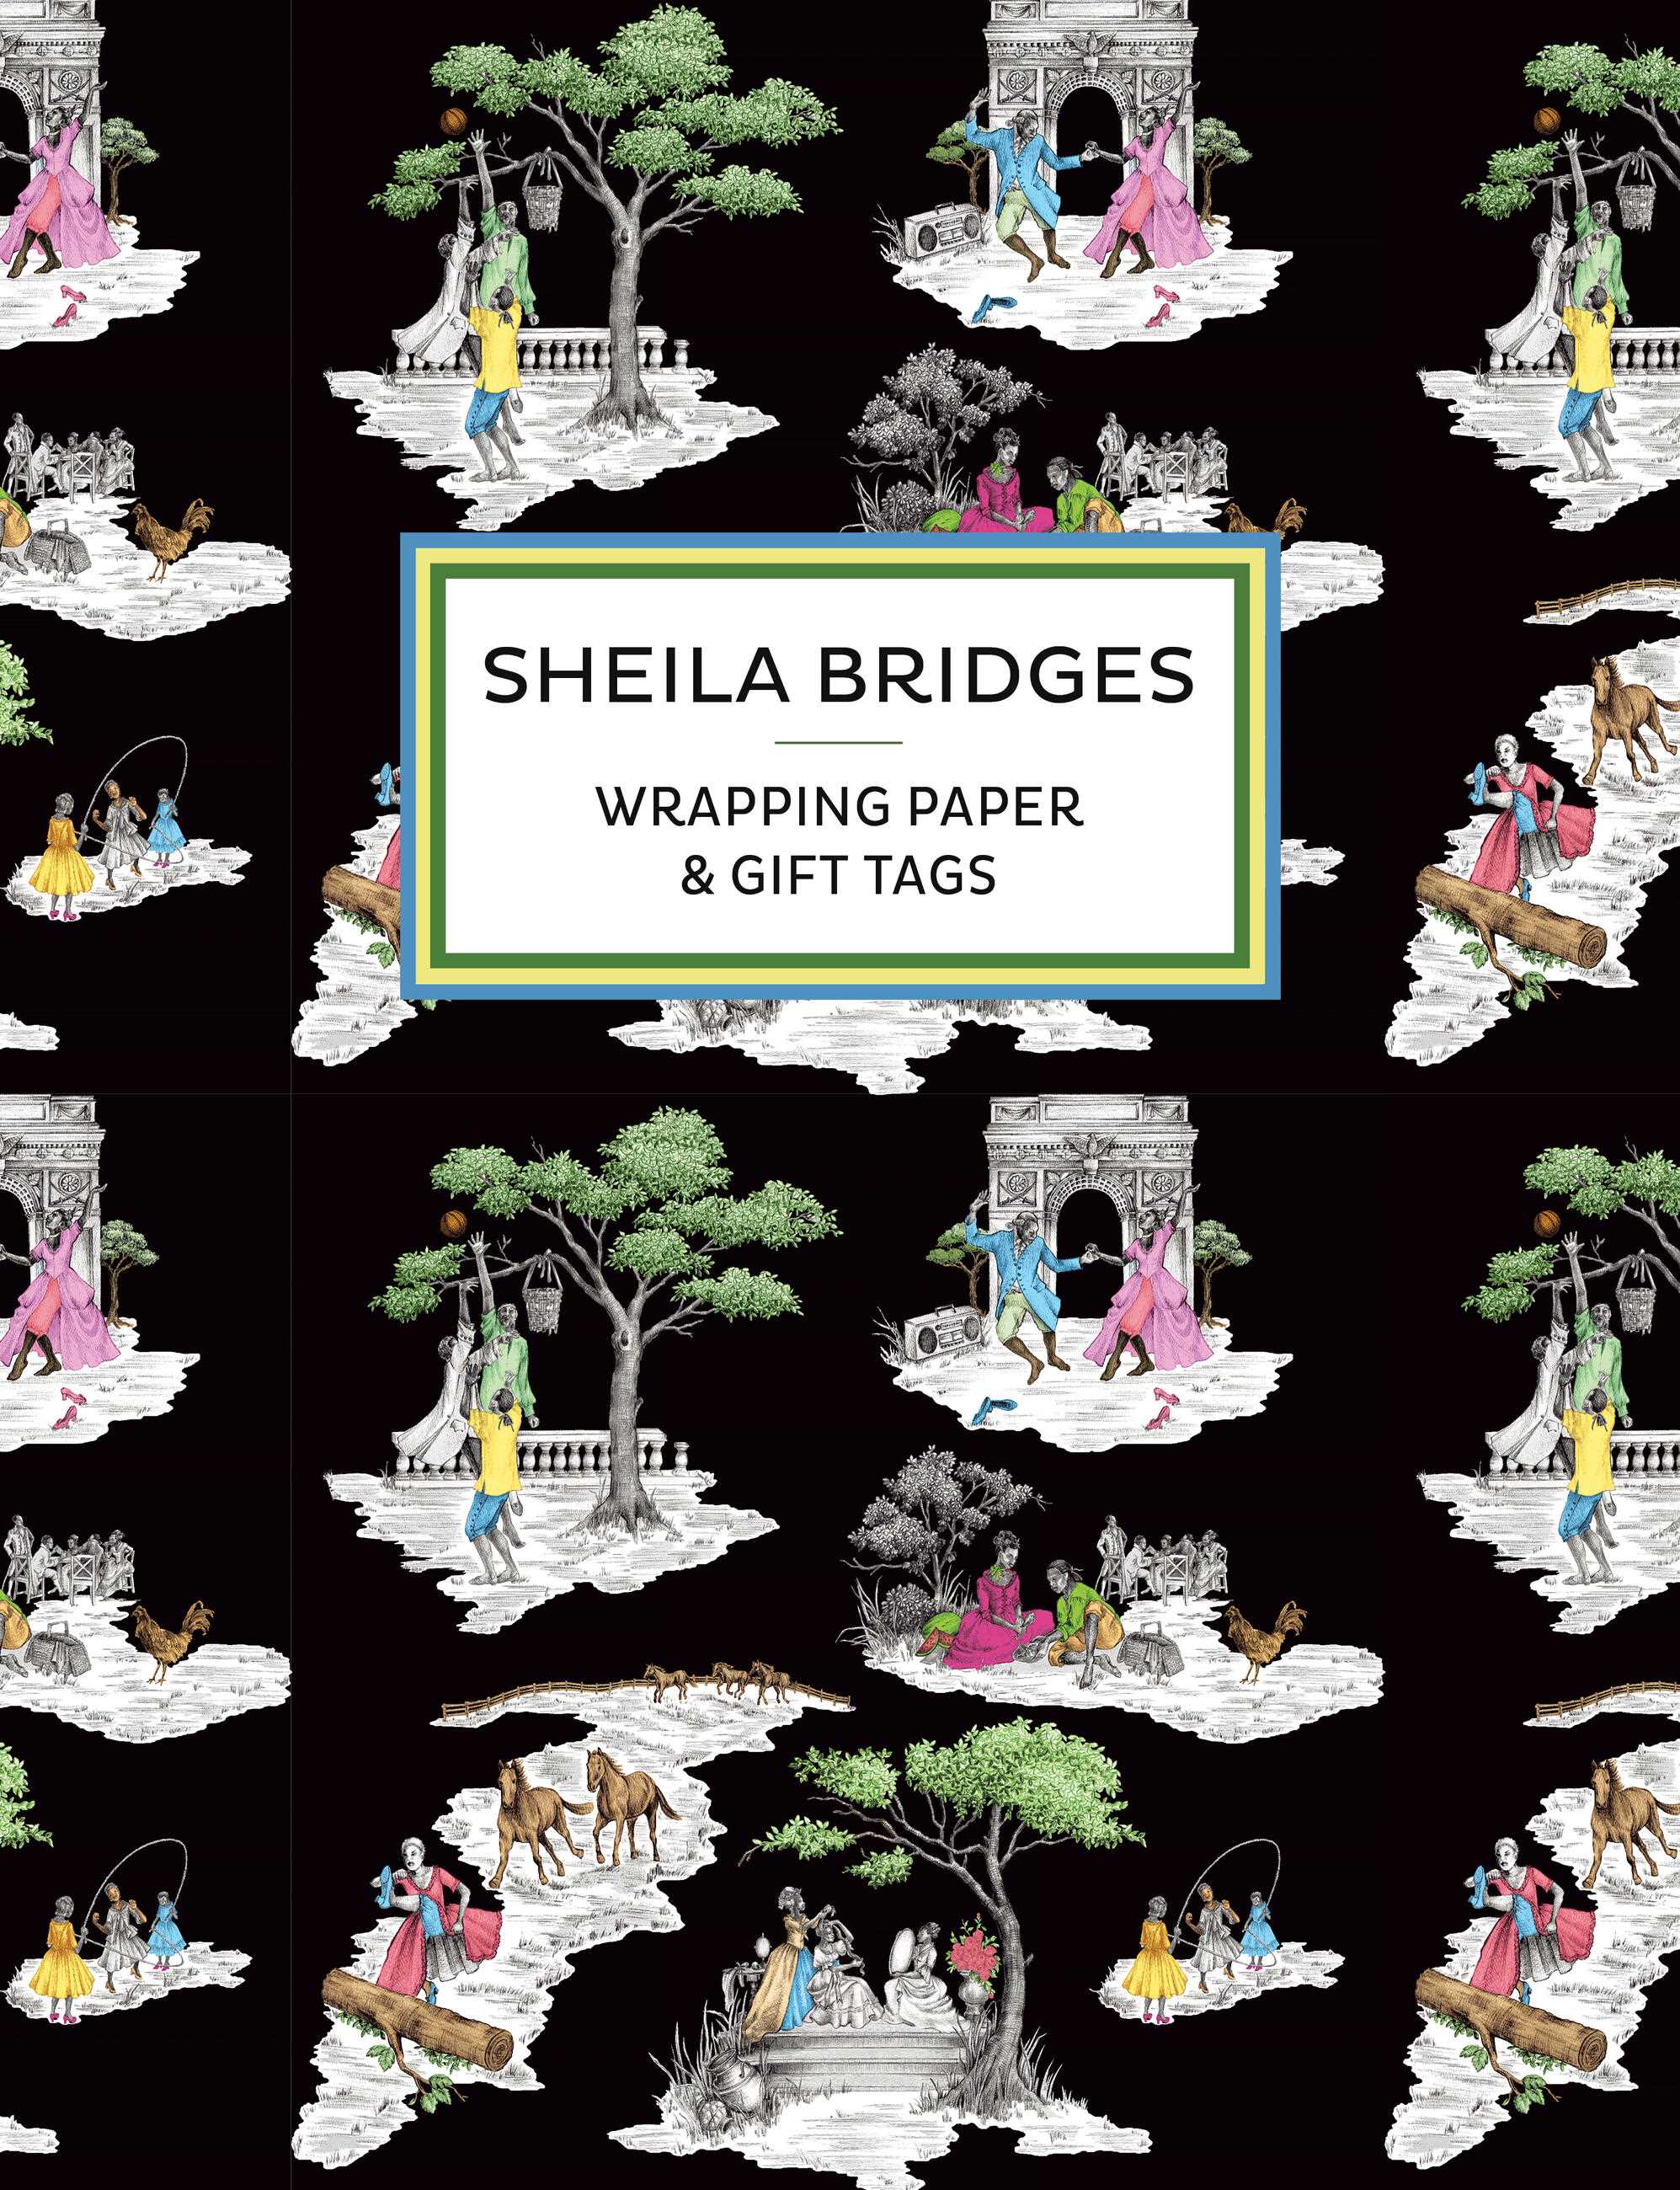 Wrapping Paper &amp; Gift Tags (Sheila Bridges)